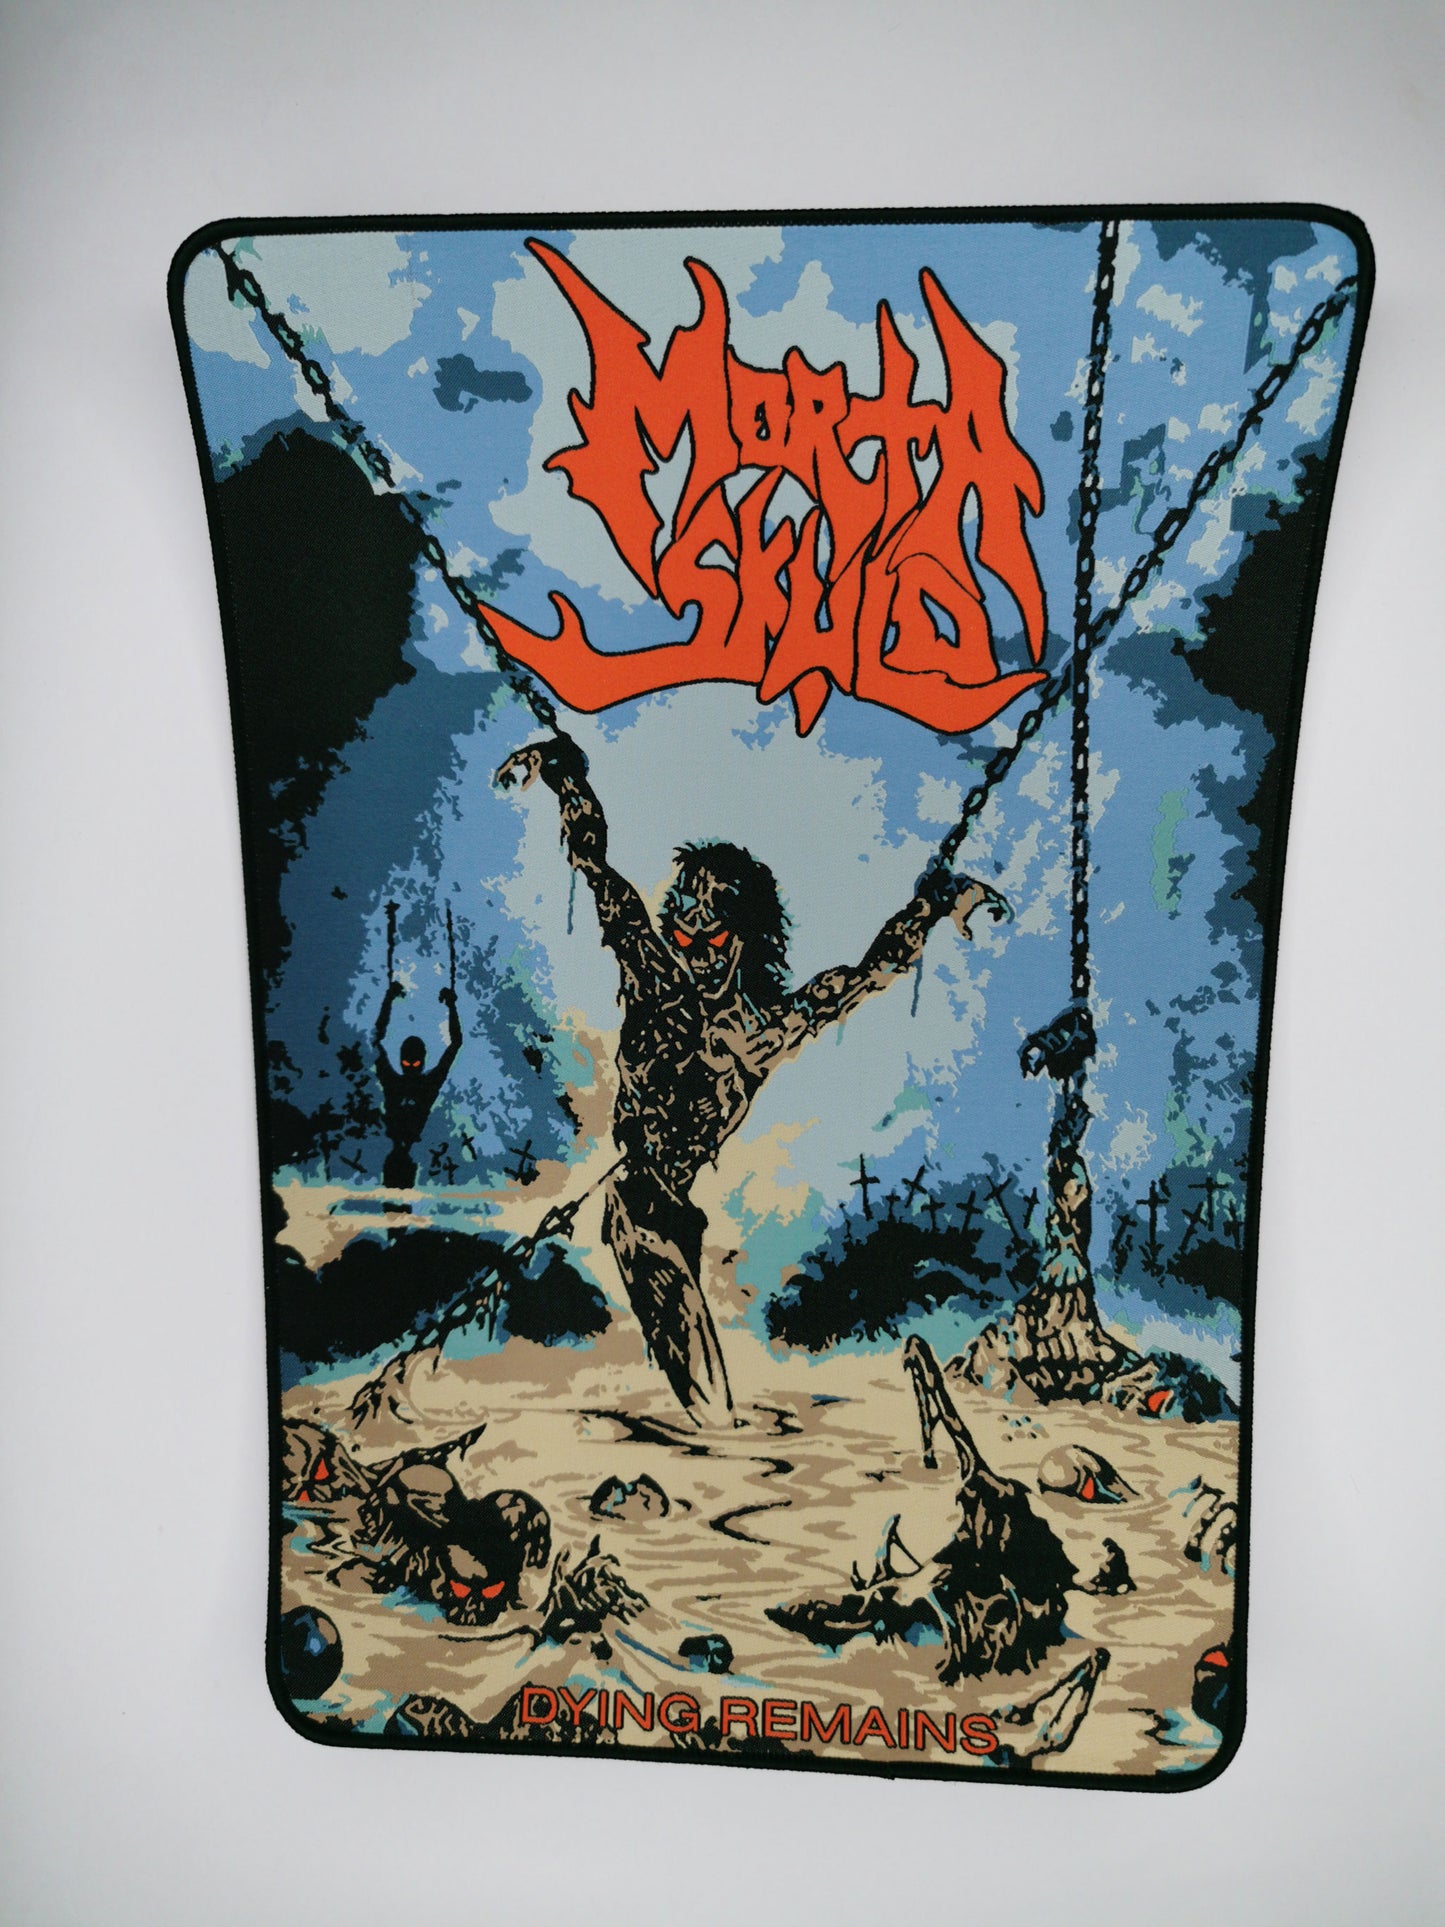 Temporal Dimensions Patches Morta Skuld Dying Remains Black Border Woven Backpatch